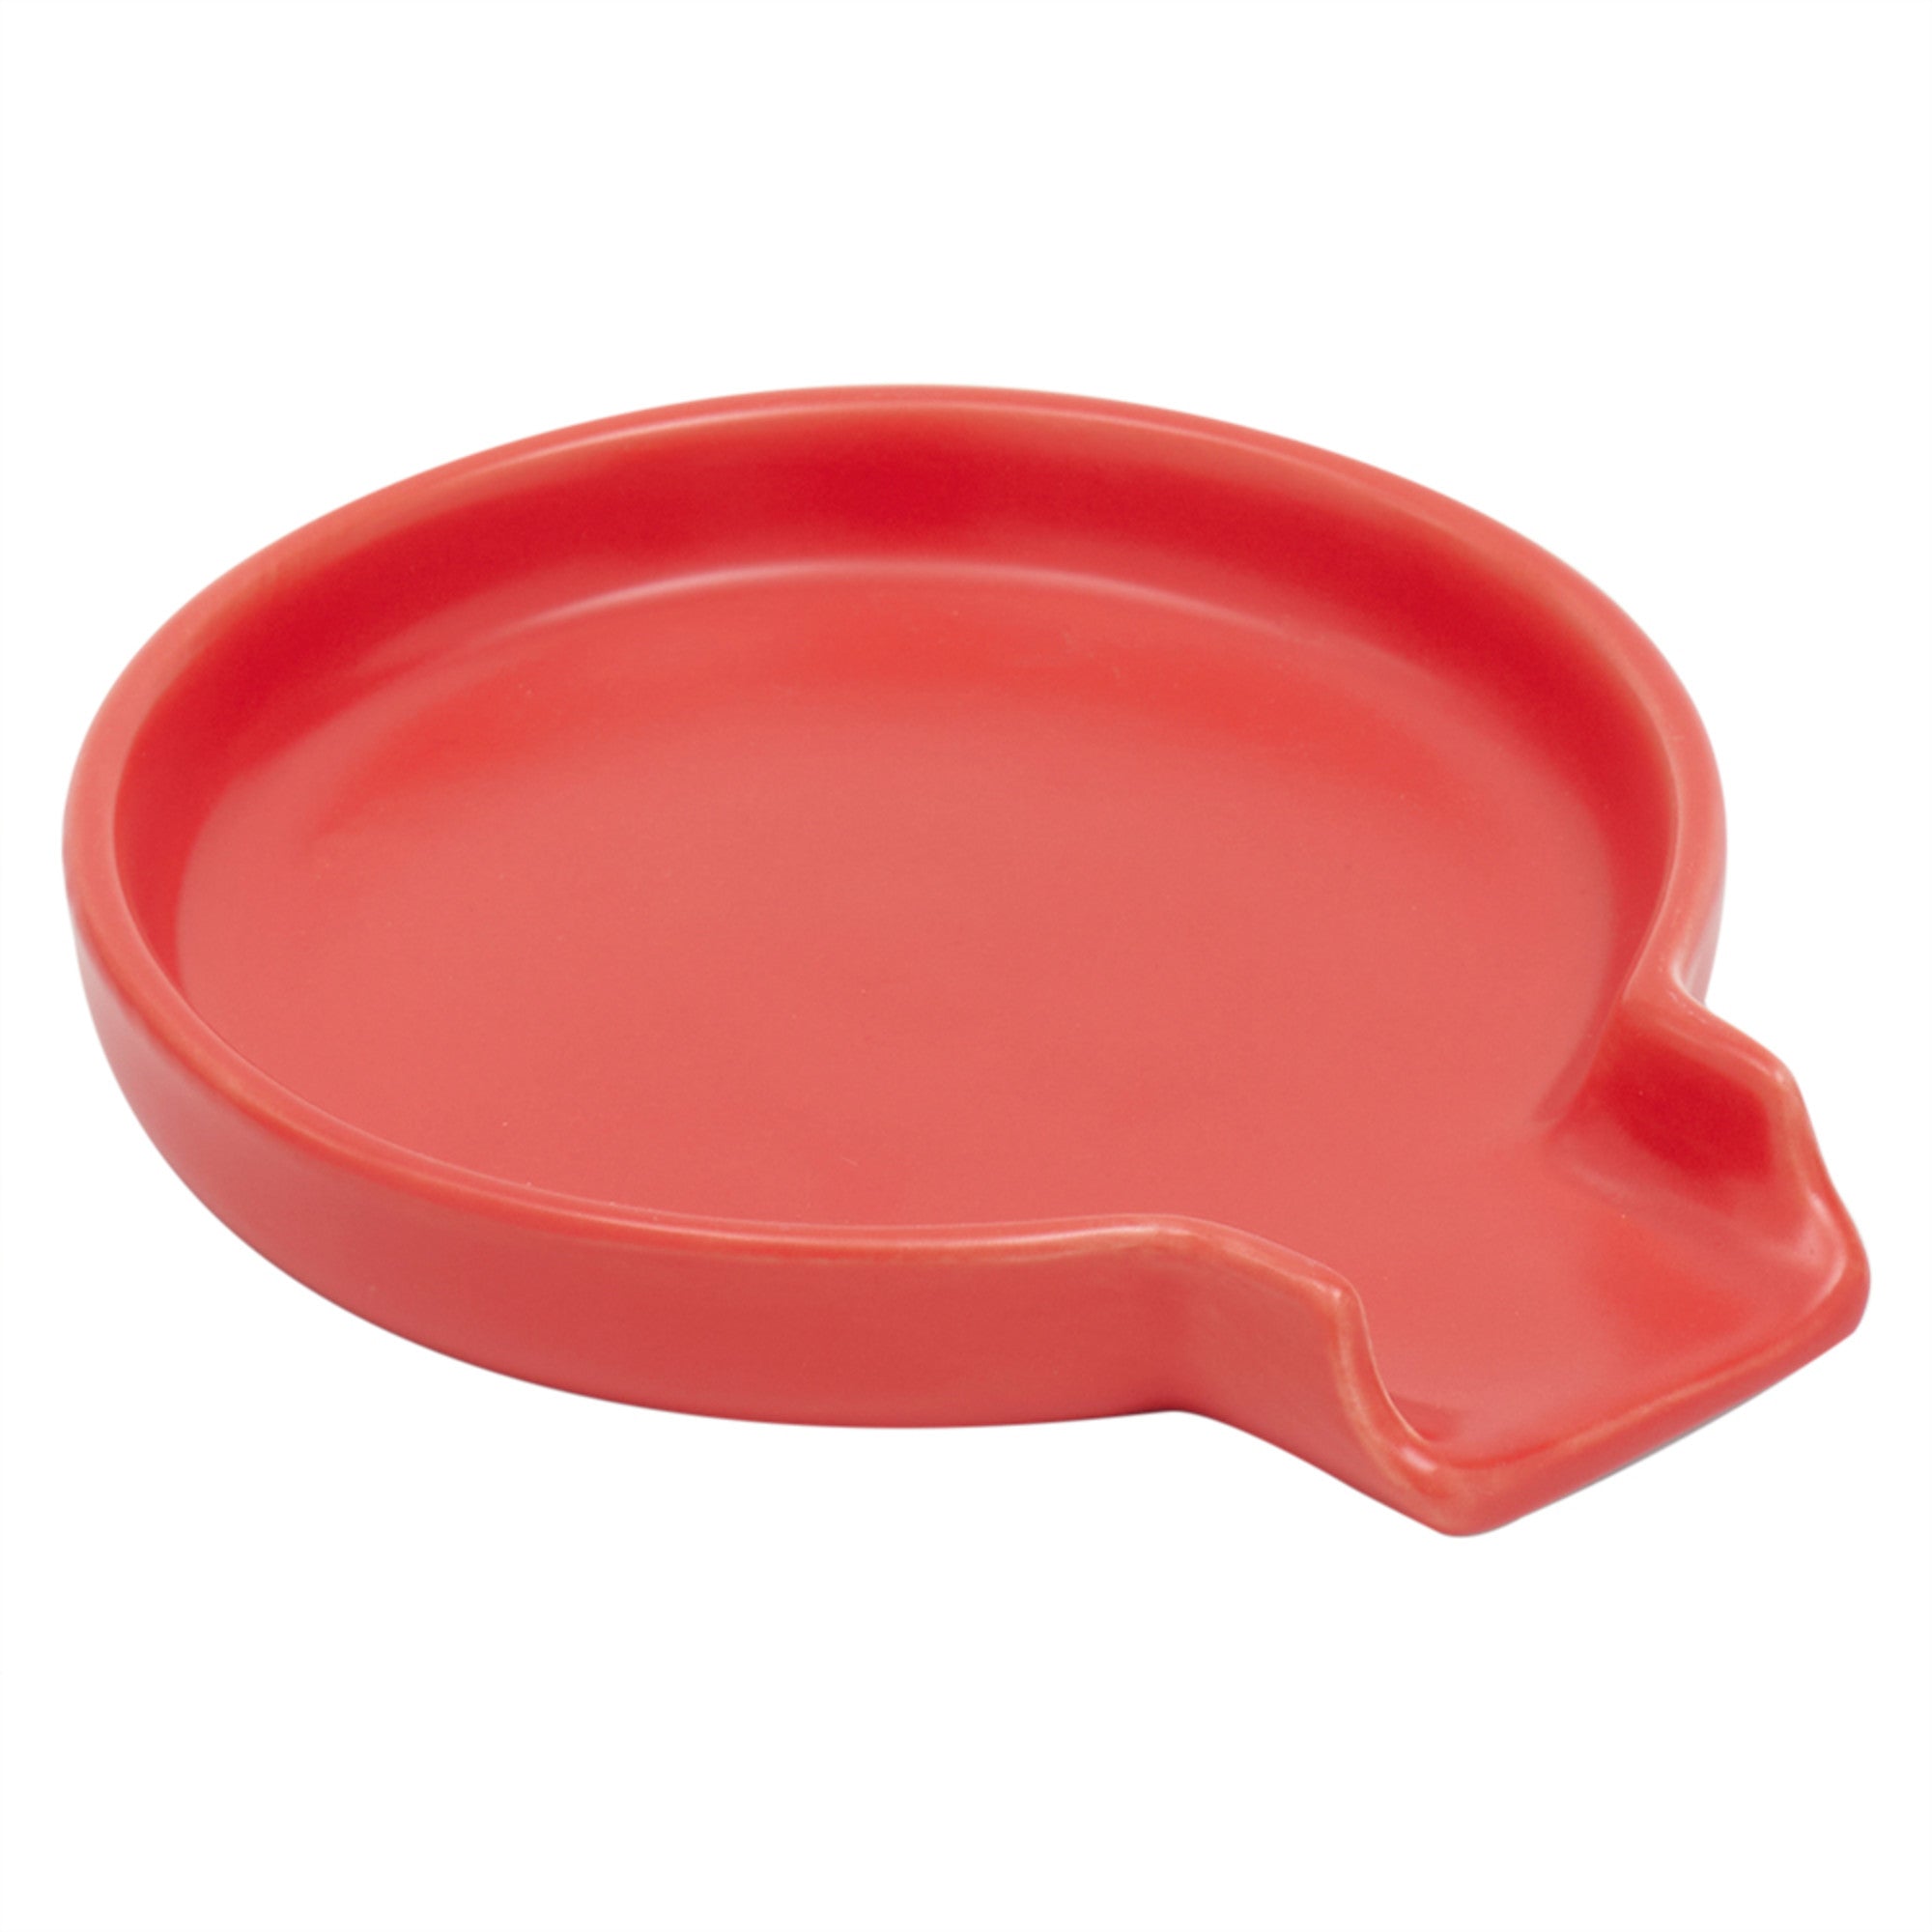 Home Basics Round Ceramic Spoon Rest - Assorted Colors